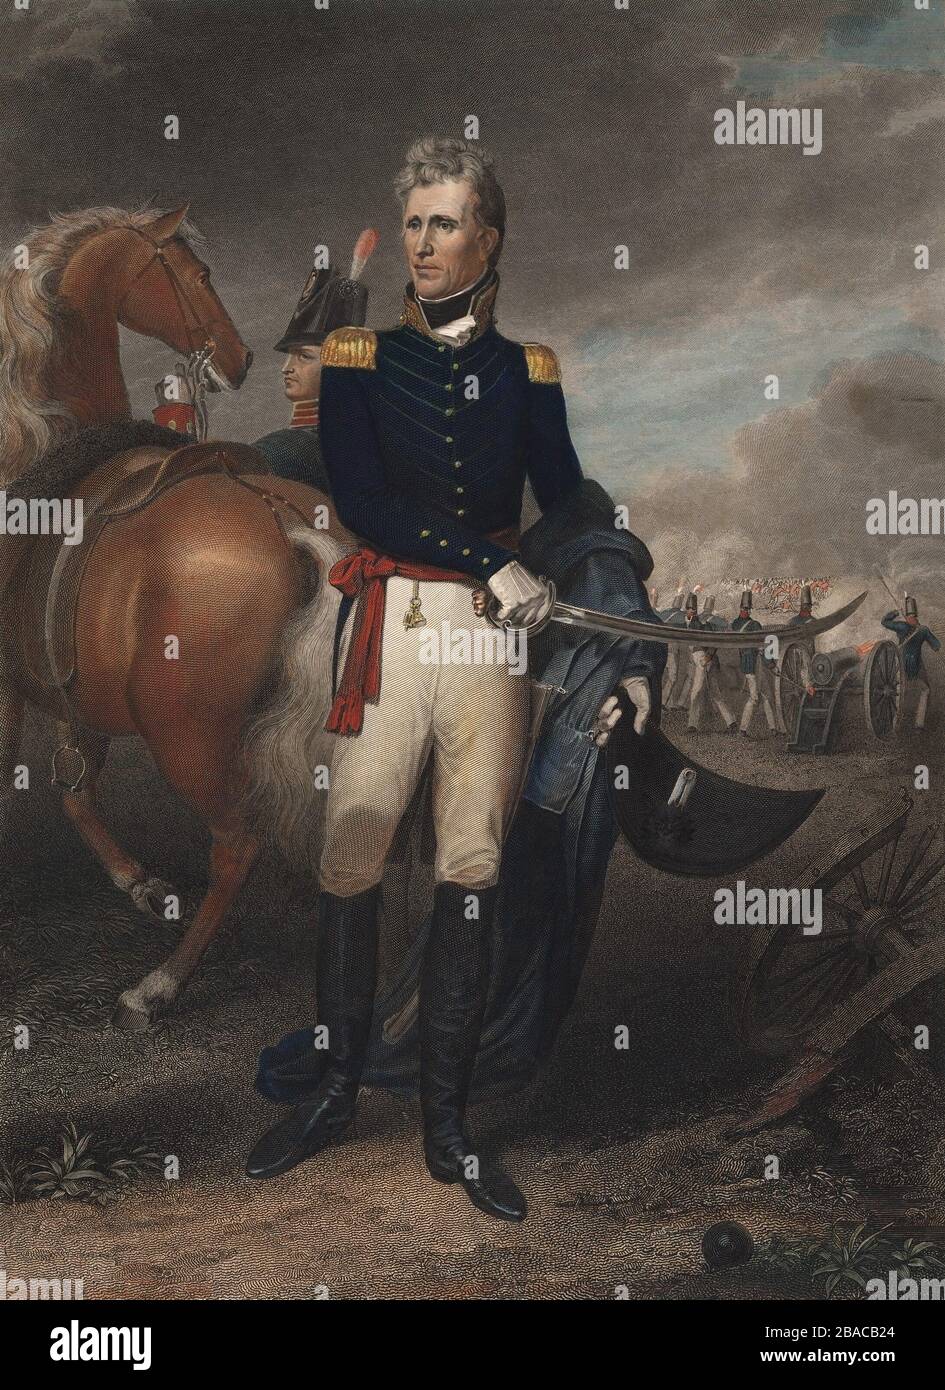 General Andrew Jackson, as the hero of New Orleans. He fought in the War of 1812 and the Indian Wars in the American Southeast. Hand colored engraving by Asher B. Durand, after a 1819 painting by John Vanderlyn  (BSLOC 2019 6 130) Stock Photo